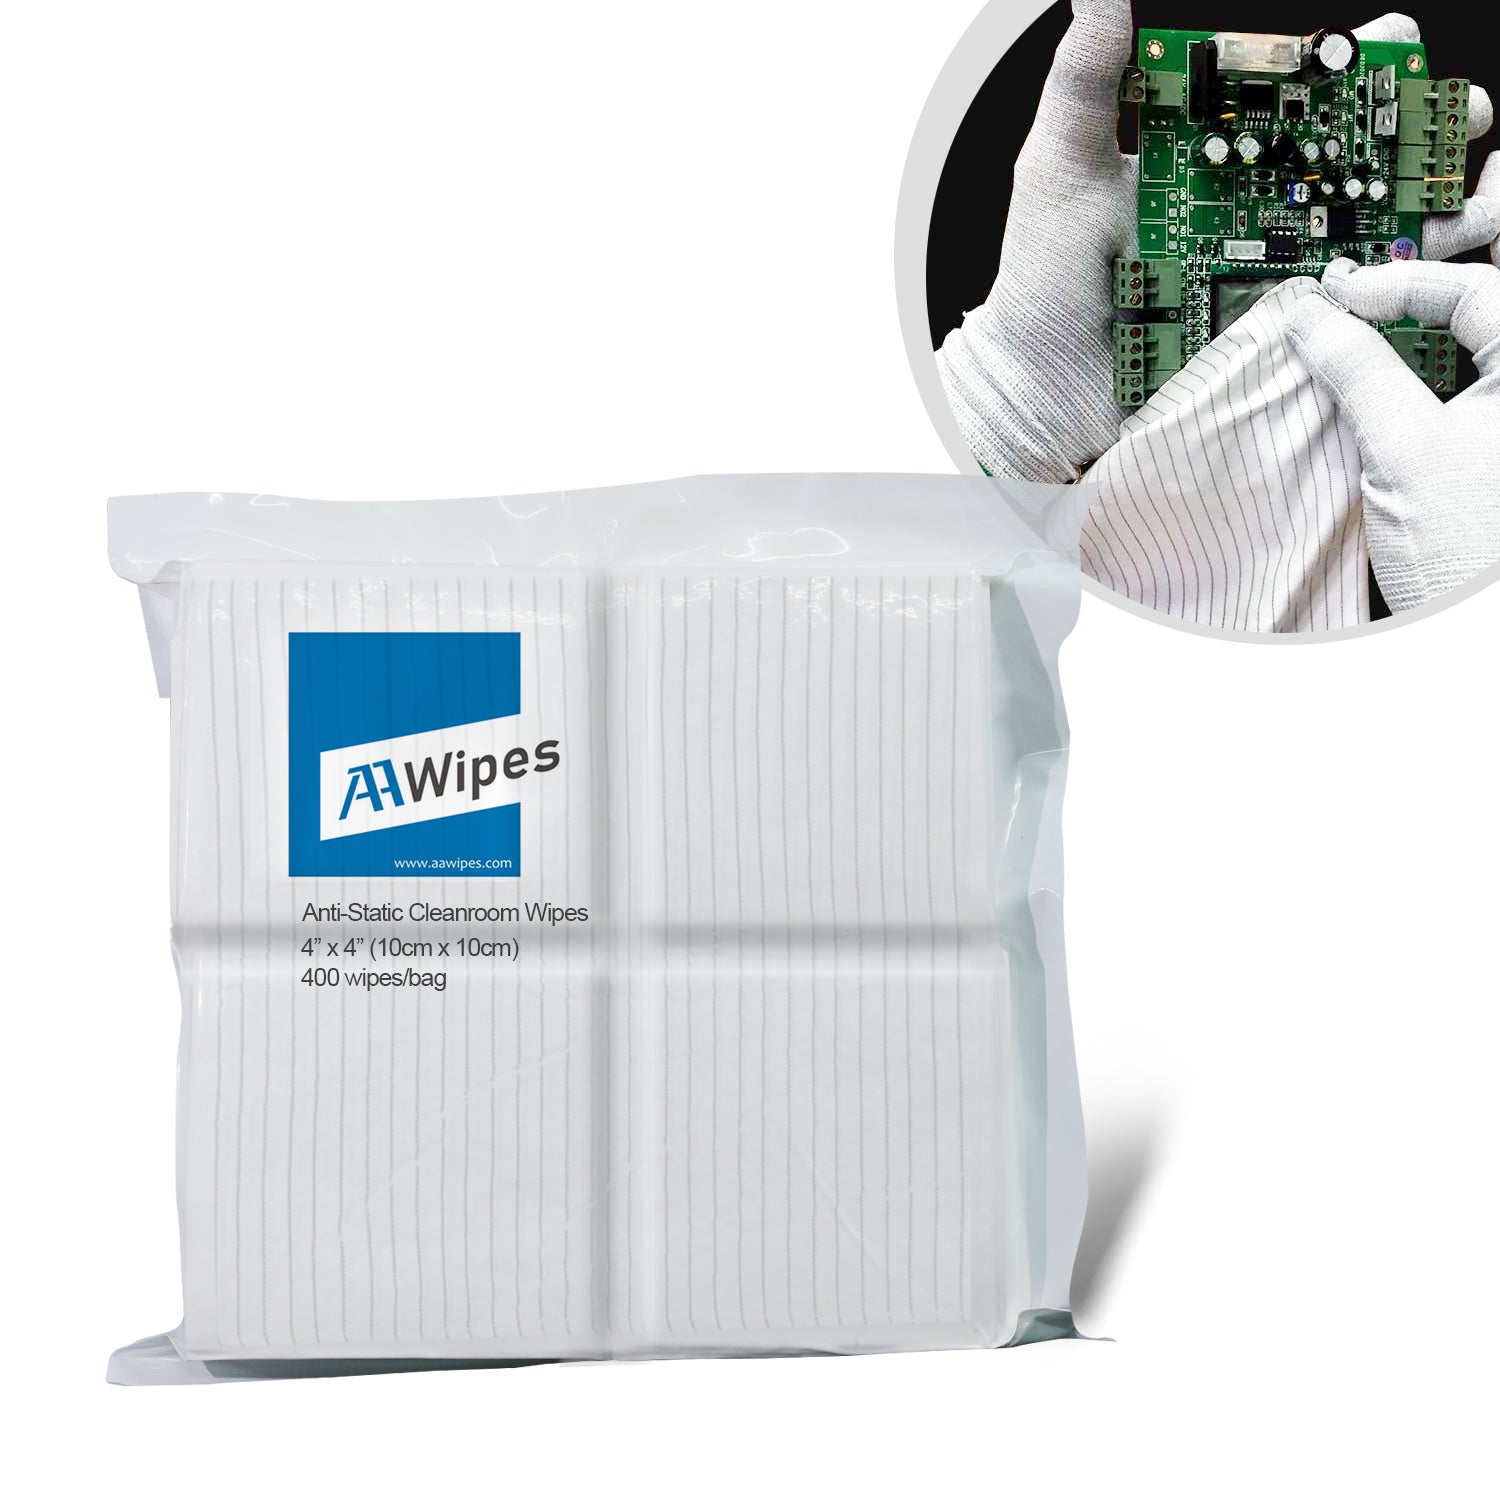 AAwipes Anti-Static Cleanroom Cloths: Premium Polyester, ESD, Low Lint, High Solvent Absorbency. Ideal for Electronics. 4,000 Wipes/Box, 10 Bags (No. CE16004).